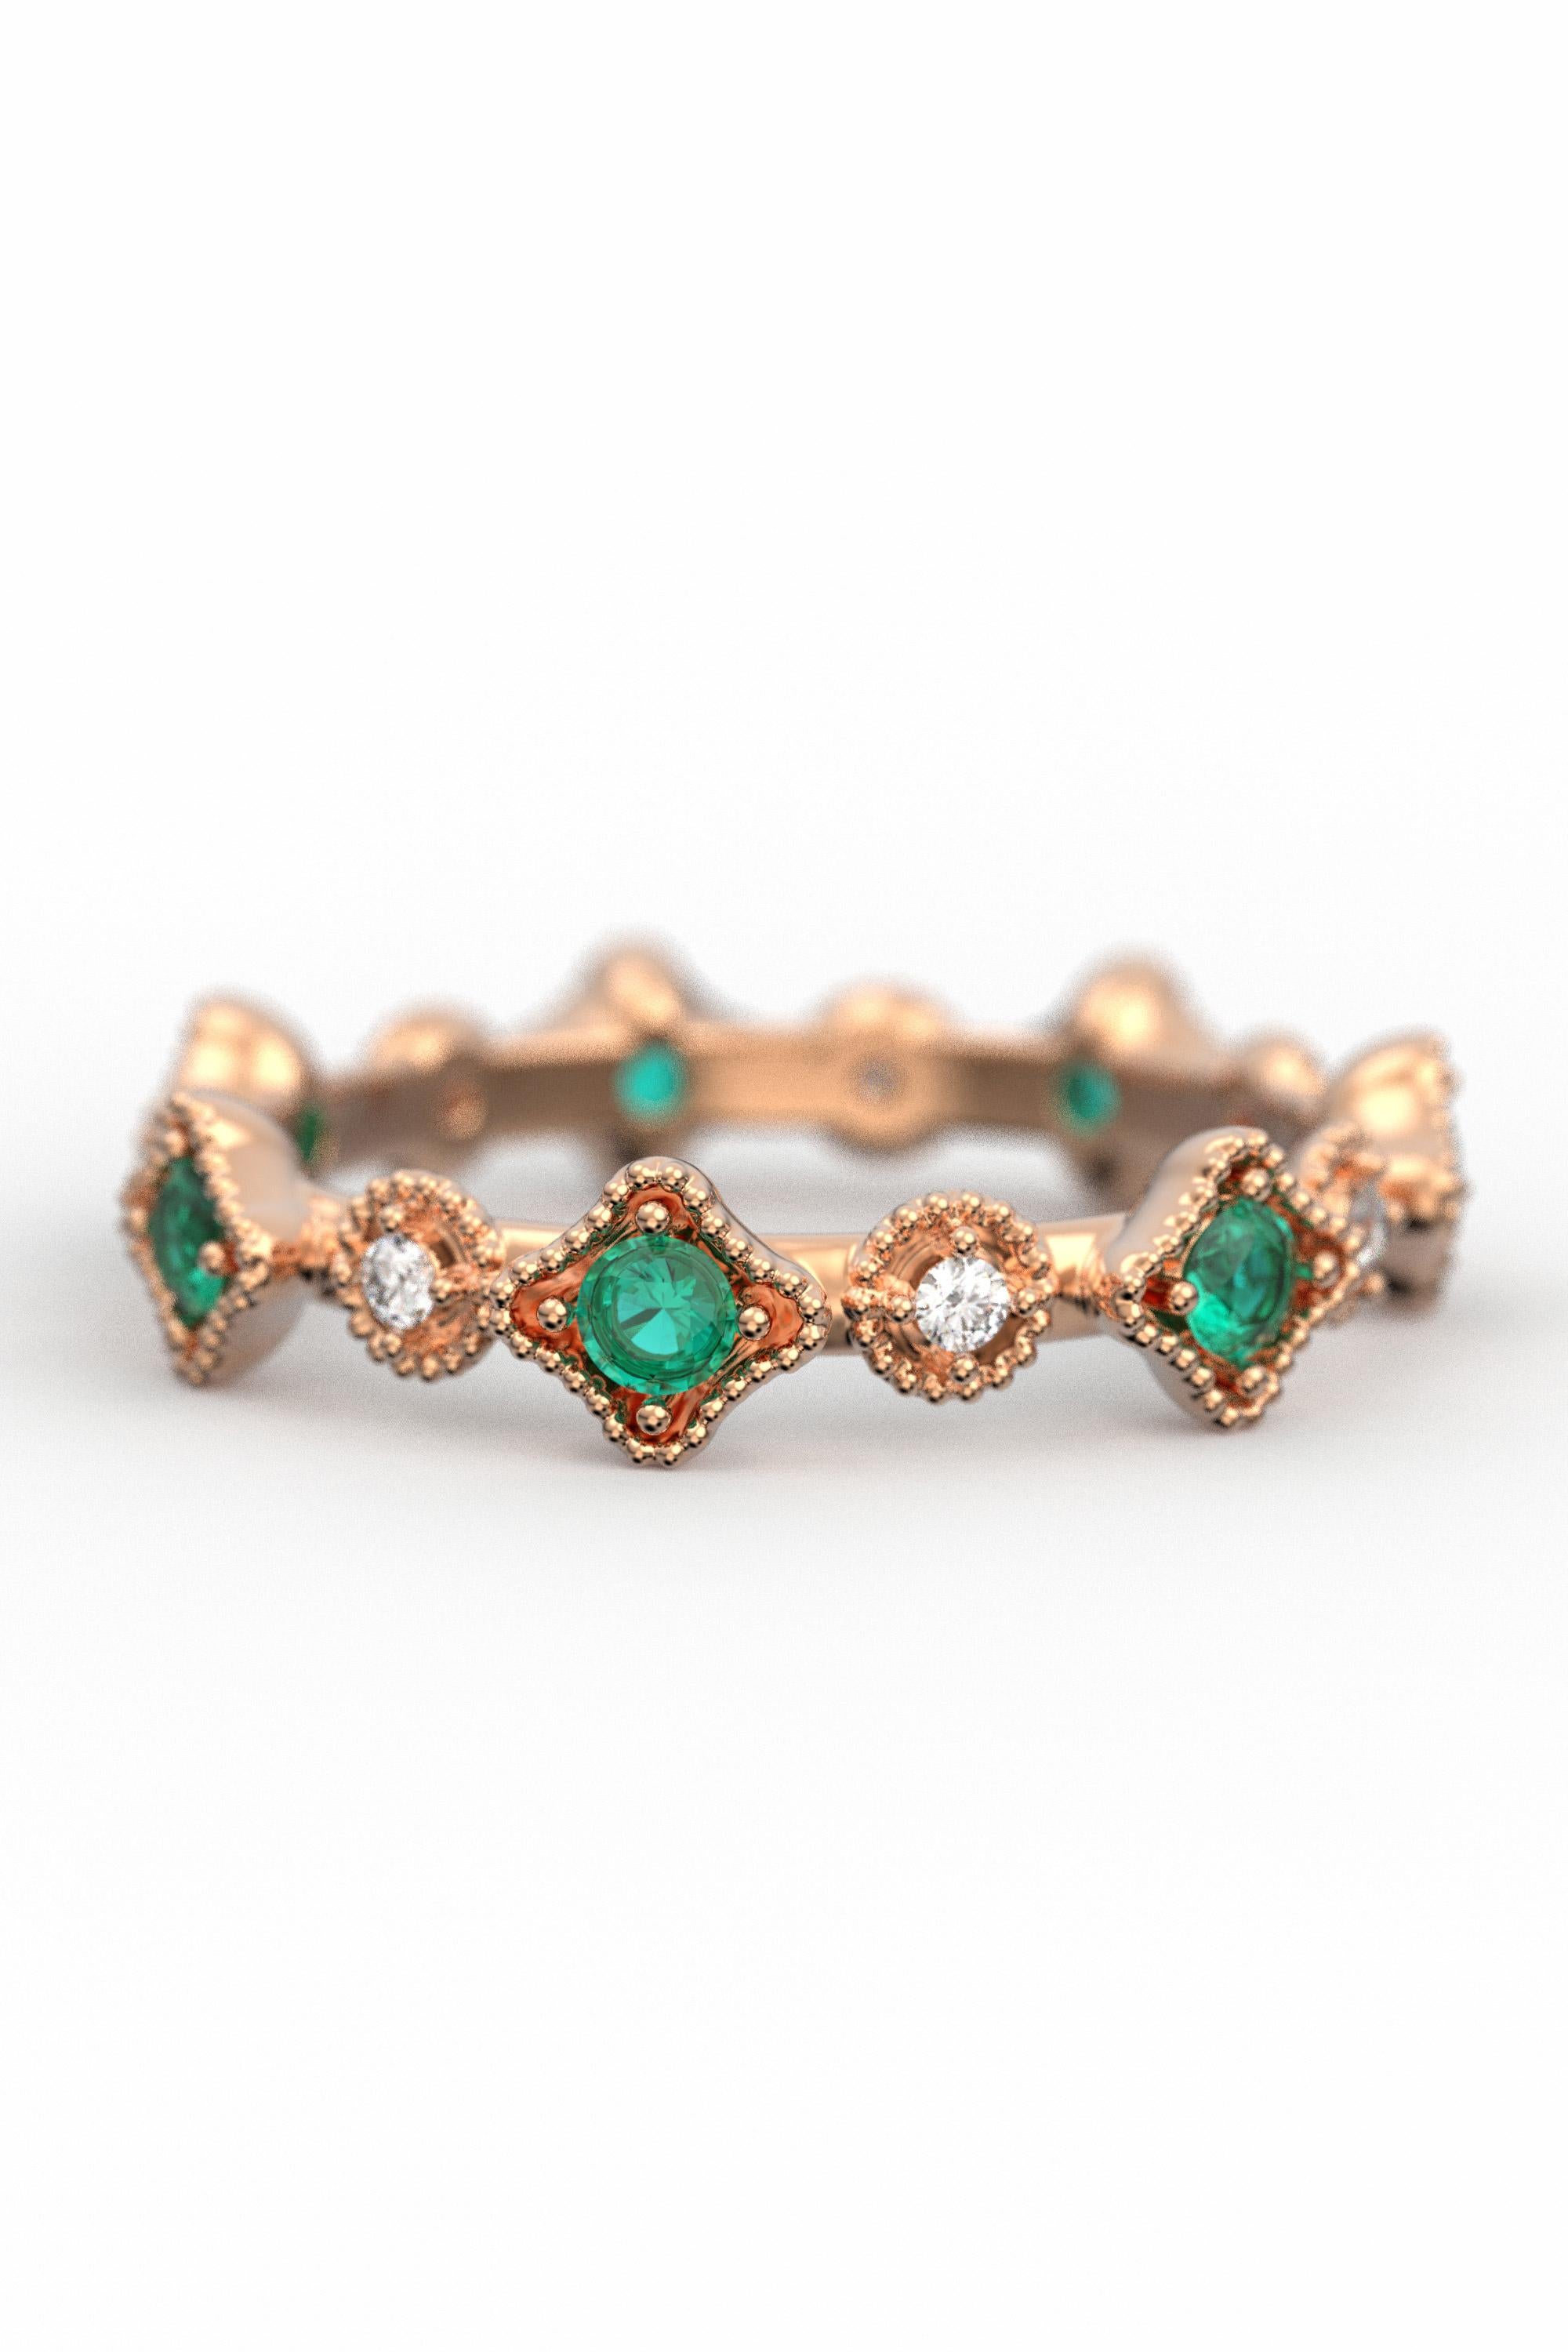 For Sale:  18k Gold Eternity Band with Natural Emerald and Diamonds, Made in Italy Jewelry 5